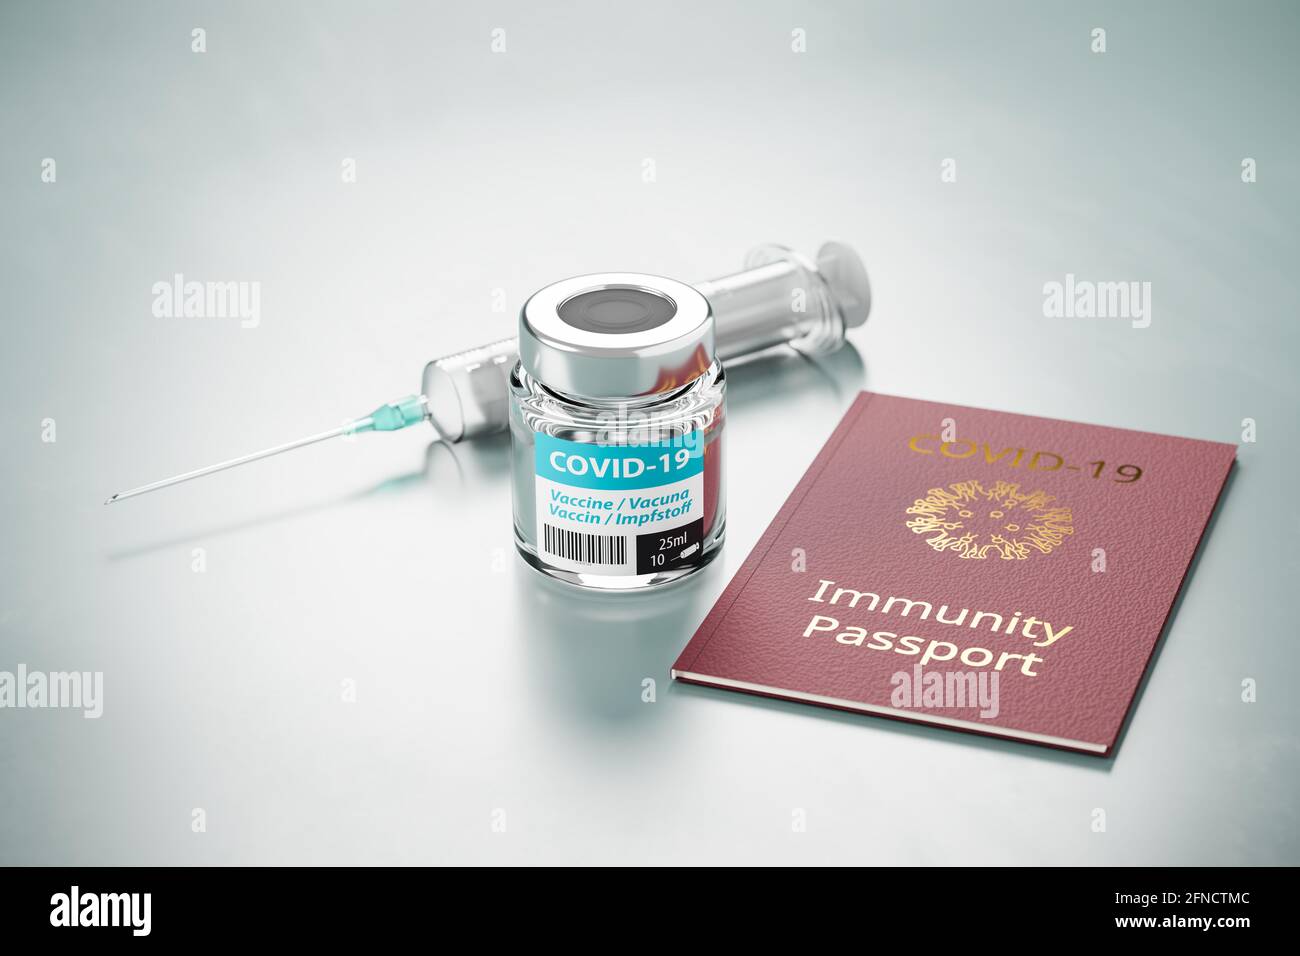 Immunity Passport concept: A vial of Covid-19 vaccine, a syringe and an immunity passport mockup on a light green / turquoise colored surface. Stock Photo